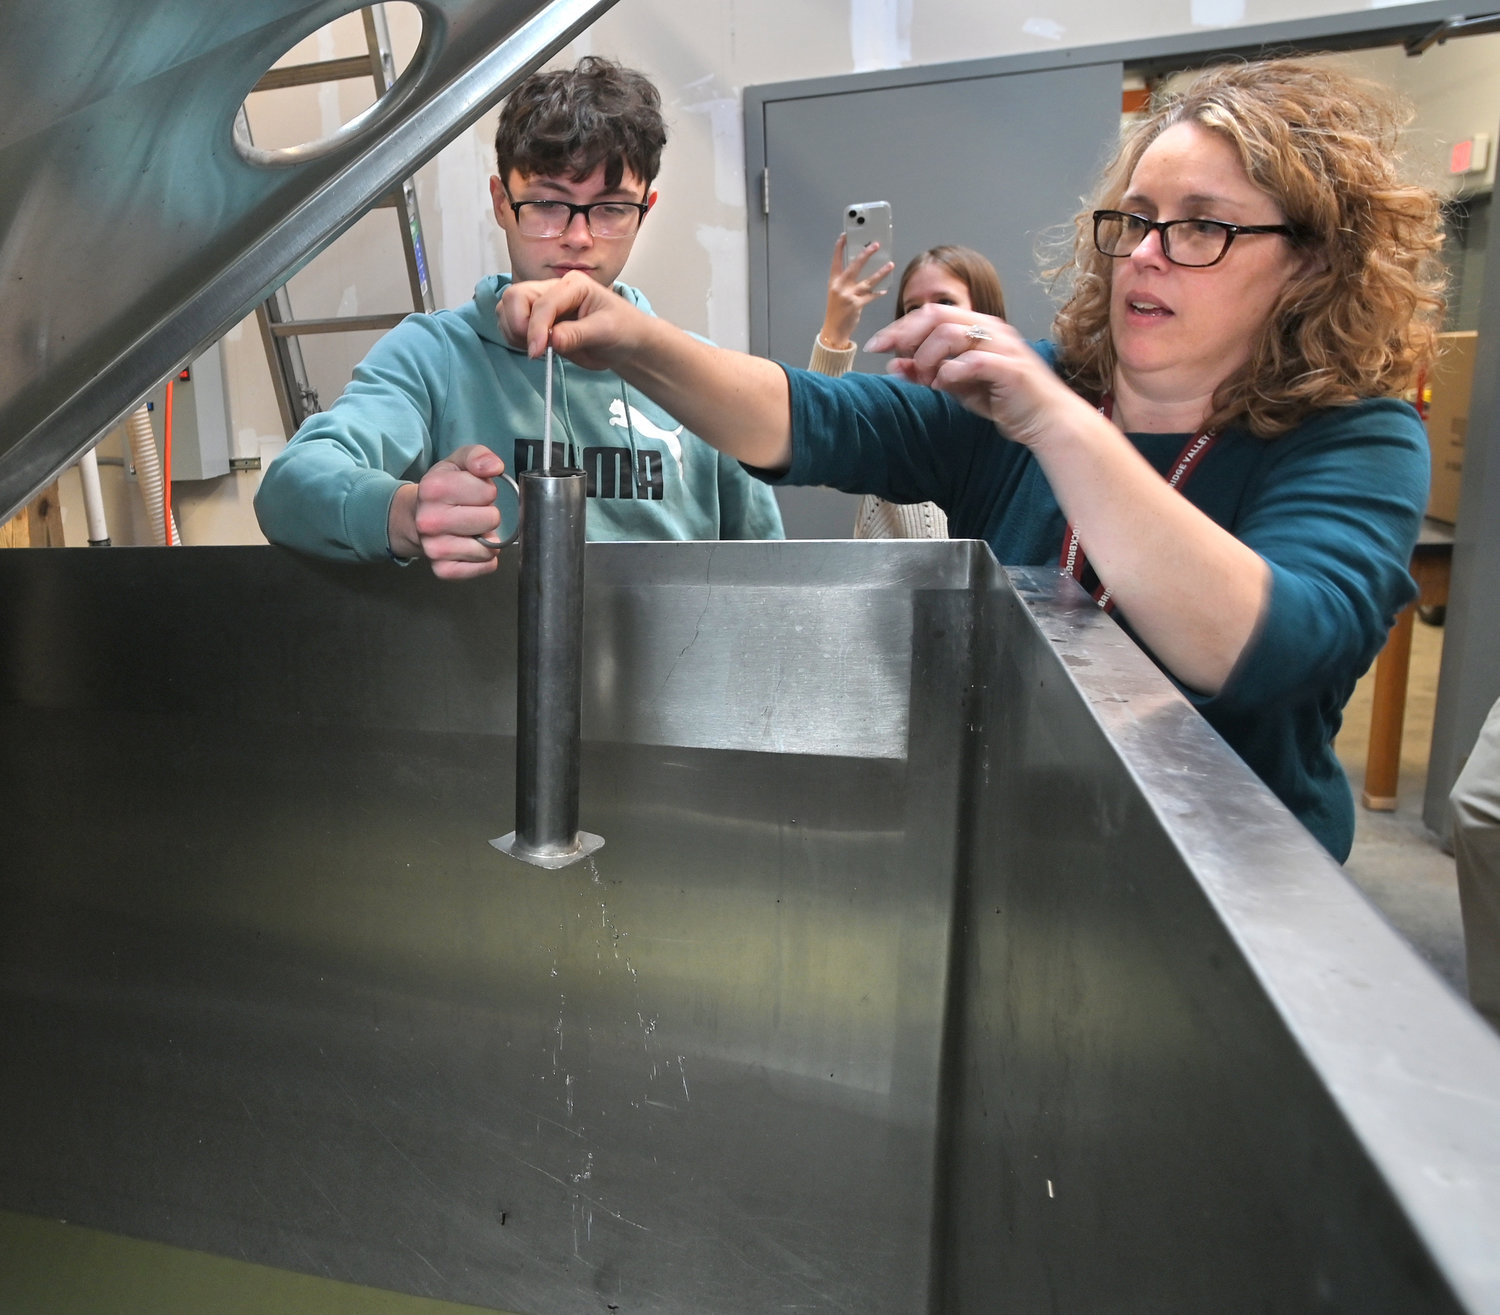 Stockbridge Valley Central School 10th grader Hayden Dye, left, and his agriculture teacher and FFA co-advisor Erin Smith check a hydrometer reading of the sap that has been collected Wednesday, Feb. 15 in the Munnsville school’s sap house.